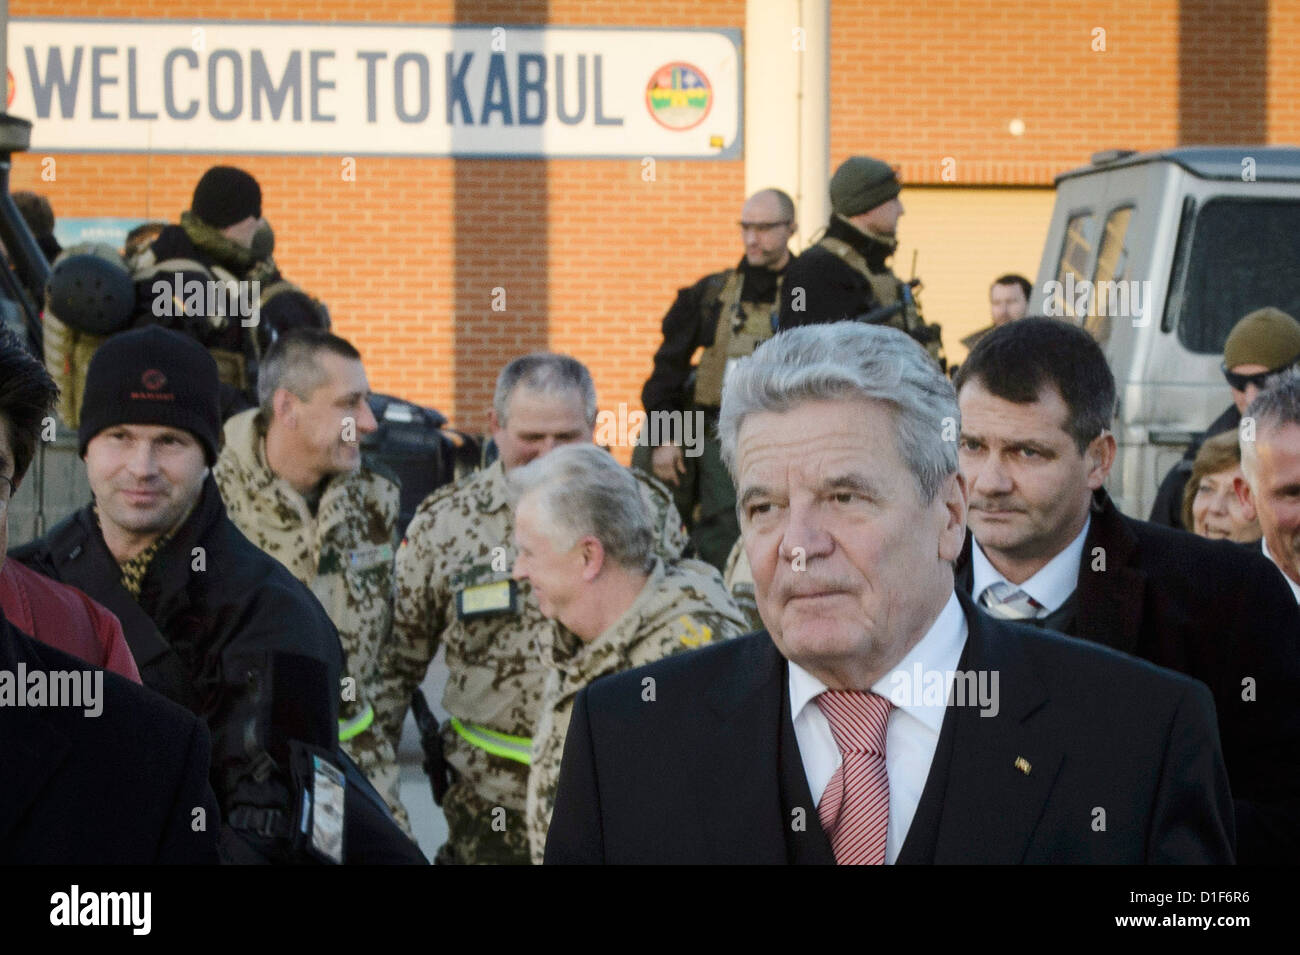 (HANDOUT) A handout dated 18 December 2012 shows German President Joachim Gauck and his delegation walk to their plane past a sign reading 'Welcome to Kabul' at the airport in Kabul, Afghanistan, 18 December 2012. Photo: GERMAN GOVERNMENT/STEFFEN KUGLER Stock Photo